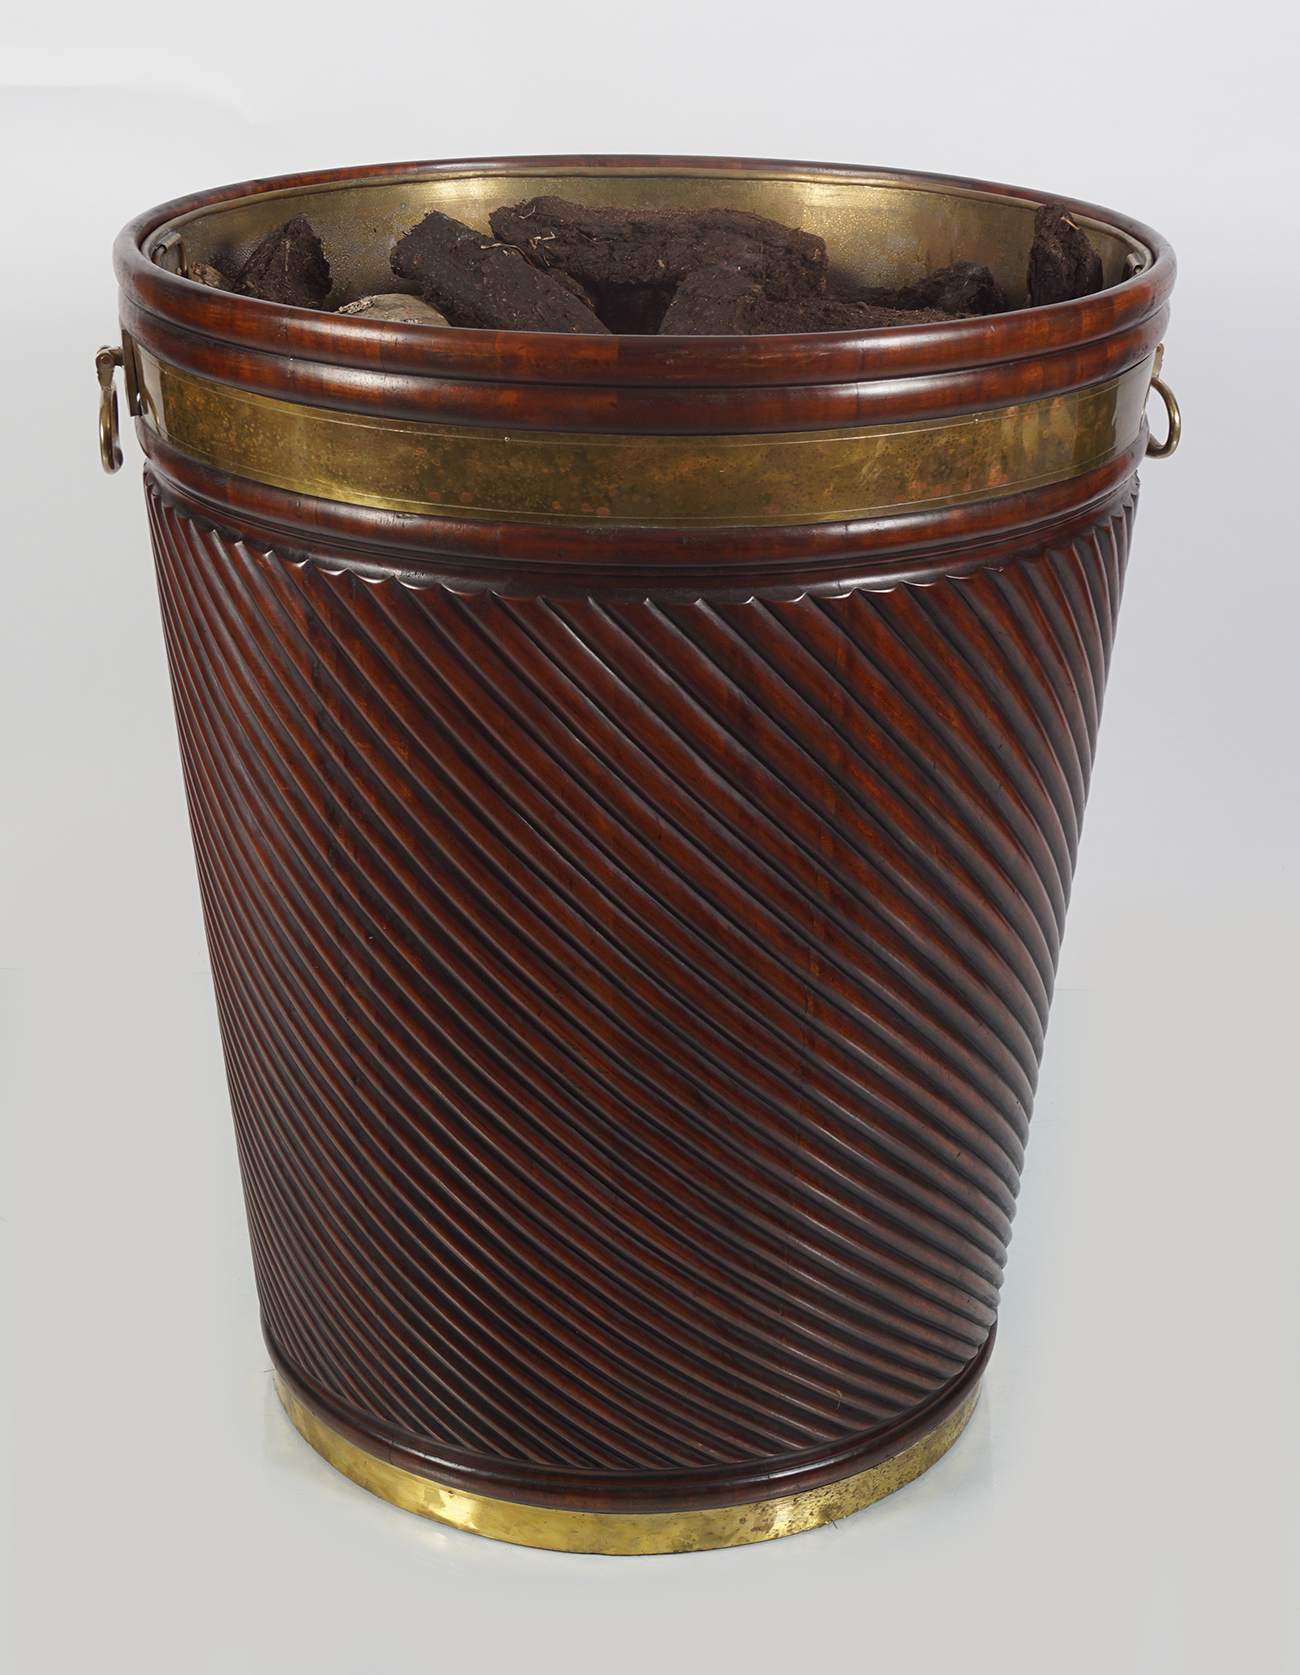 ENORMOUS GEORGE III STYLE BRASS BOUND PEAT BARREL